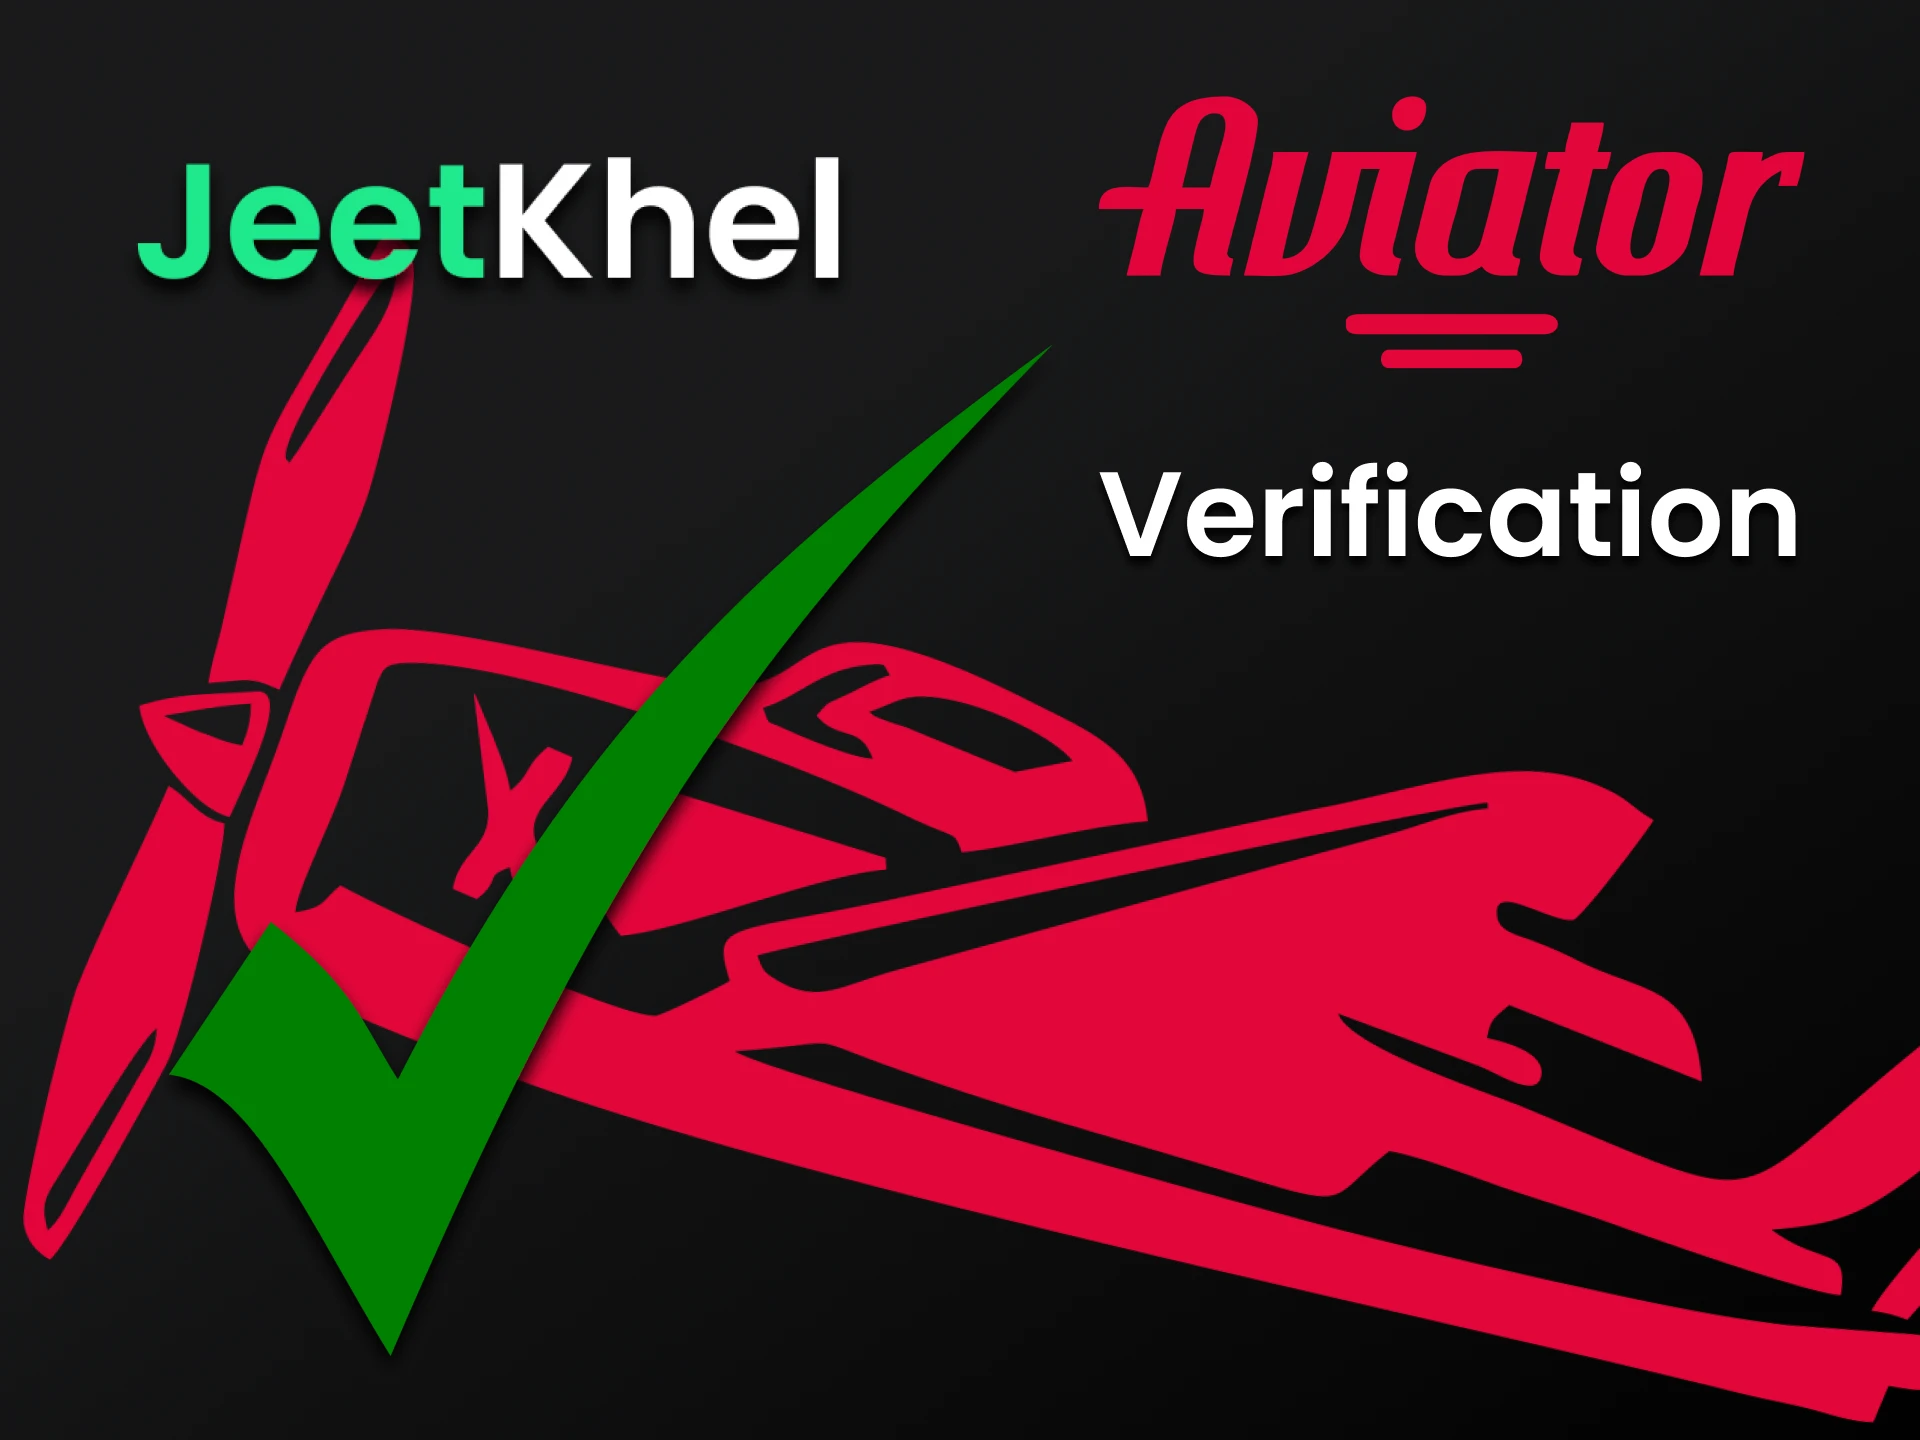 To play Aviator you need to fill in all the details on the JeetKhel website.